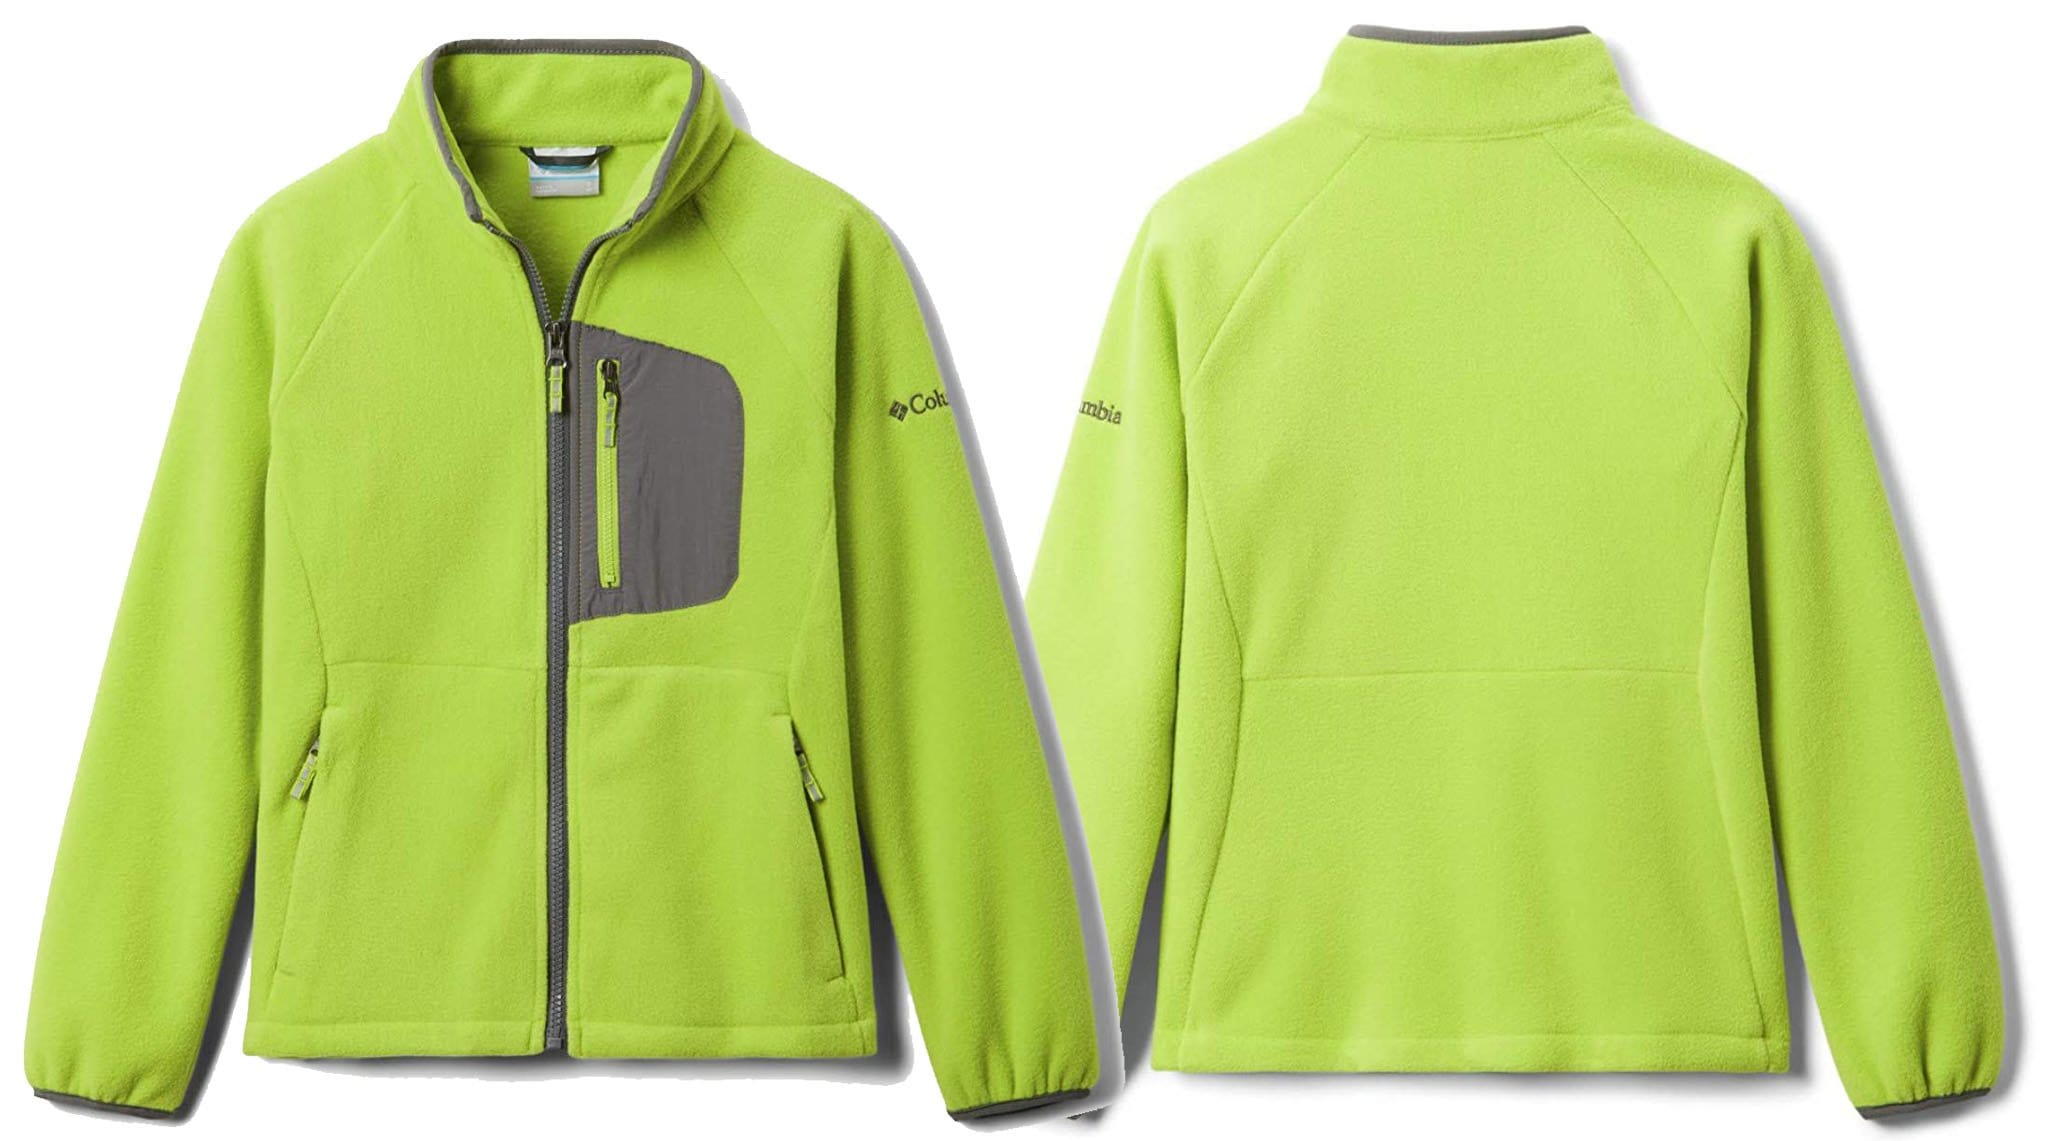 Let your kids feel like a big adventurer in this tech-inspired Columbia Fast Trek III jacket